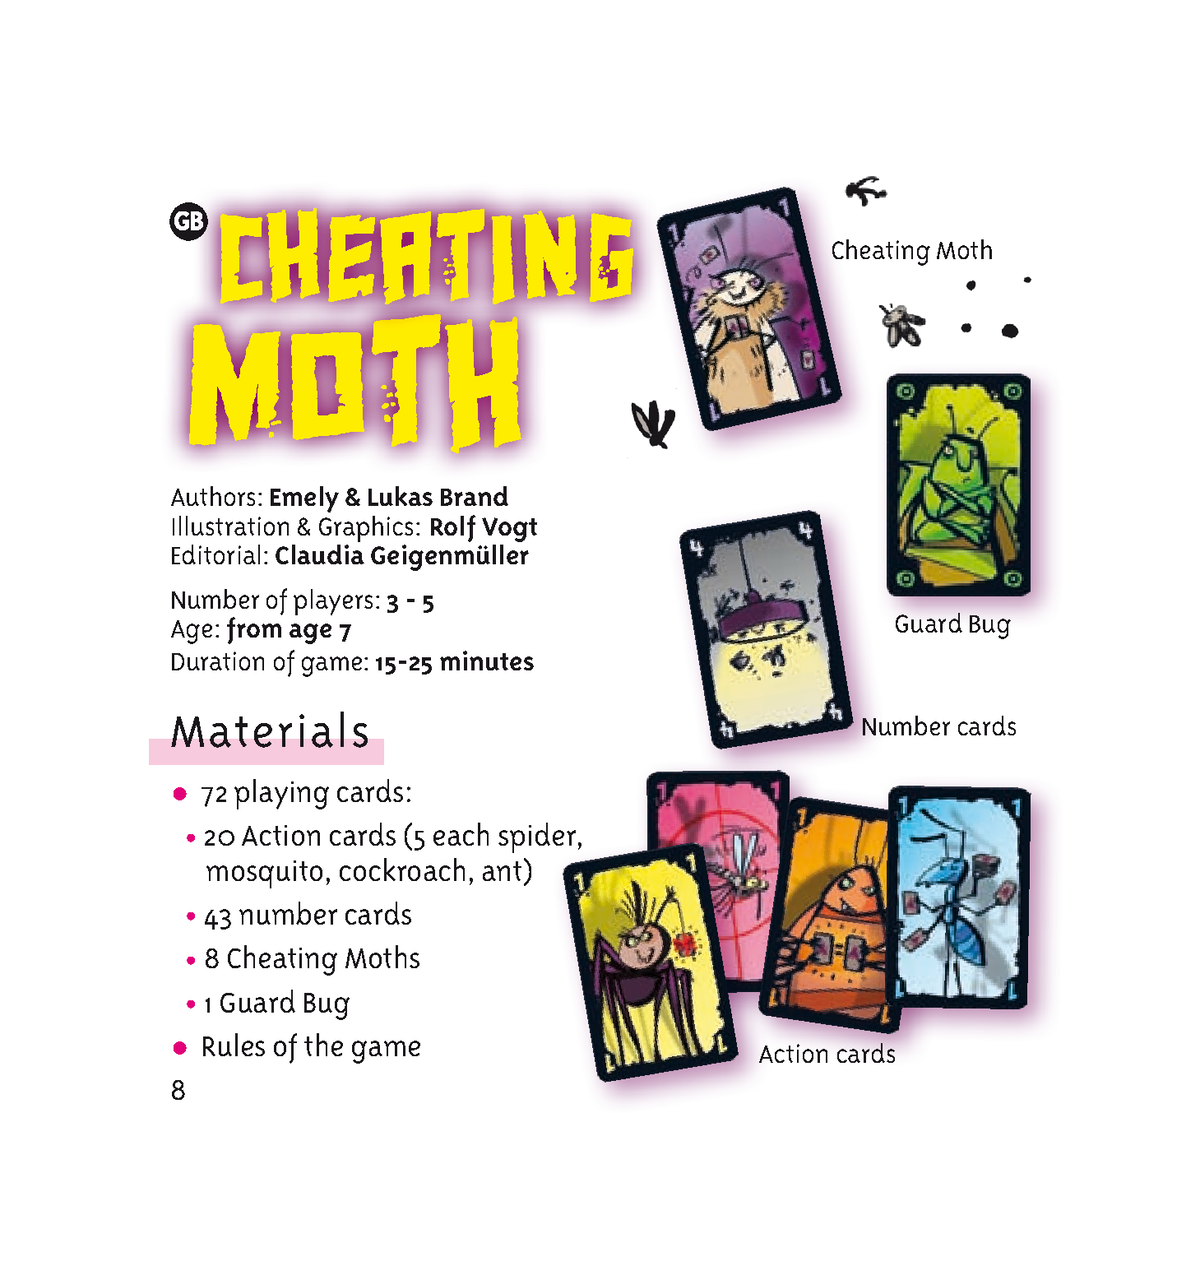 CHEATING MOTH Game Rules - How To Play CHEATING MOTH